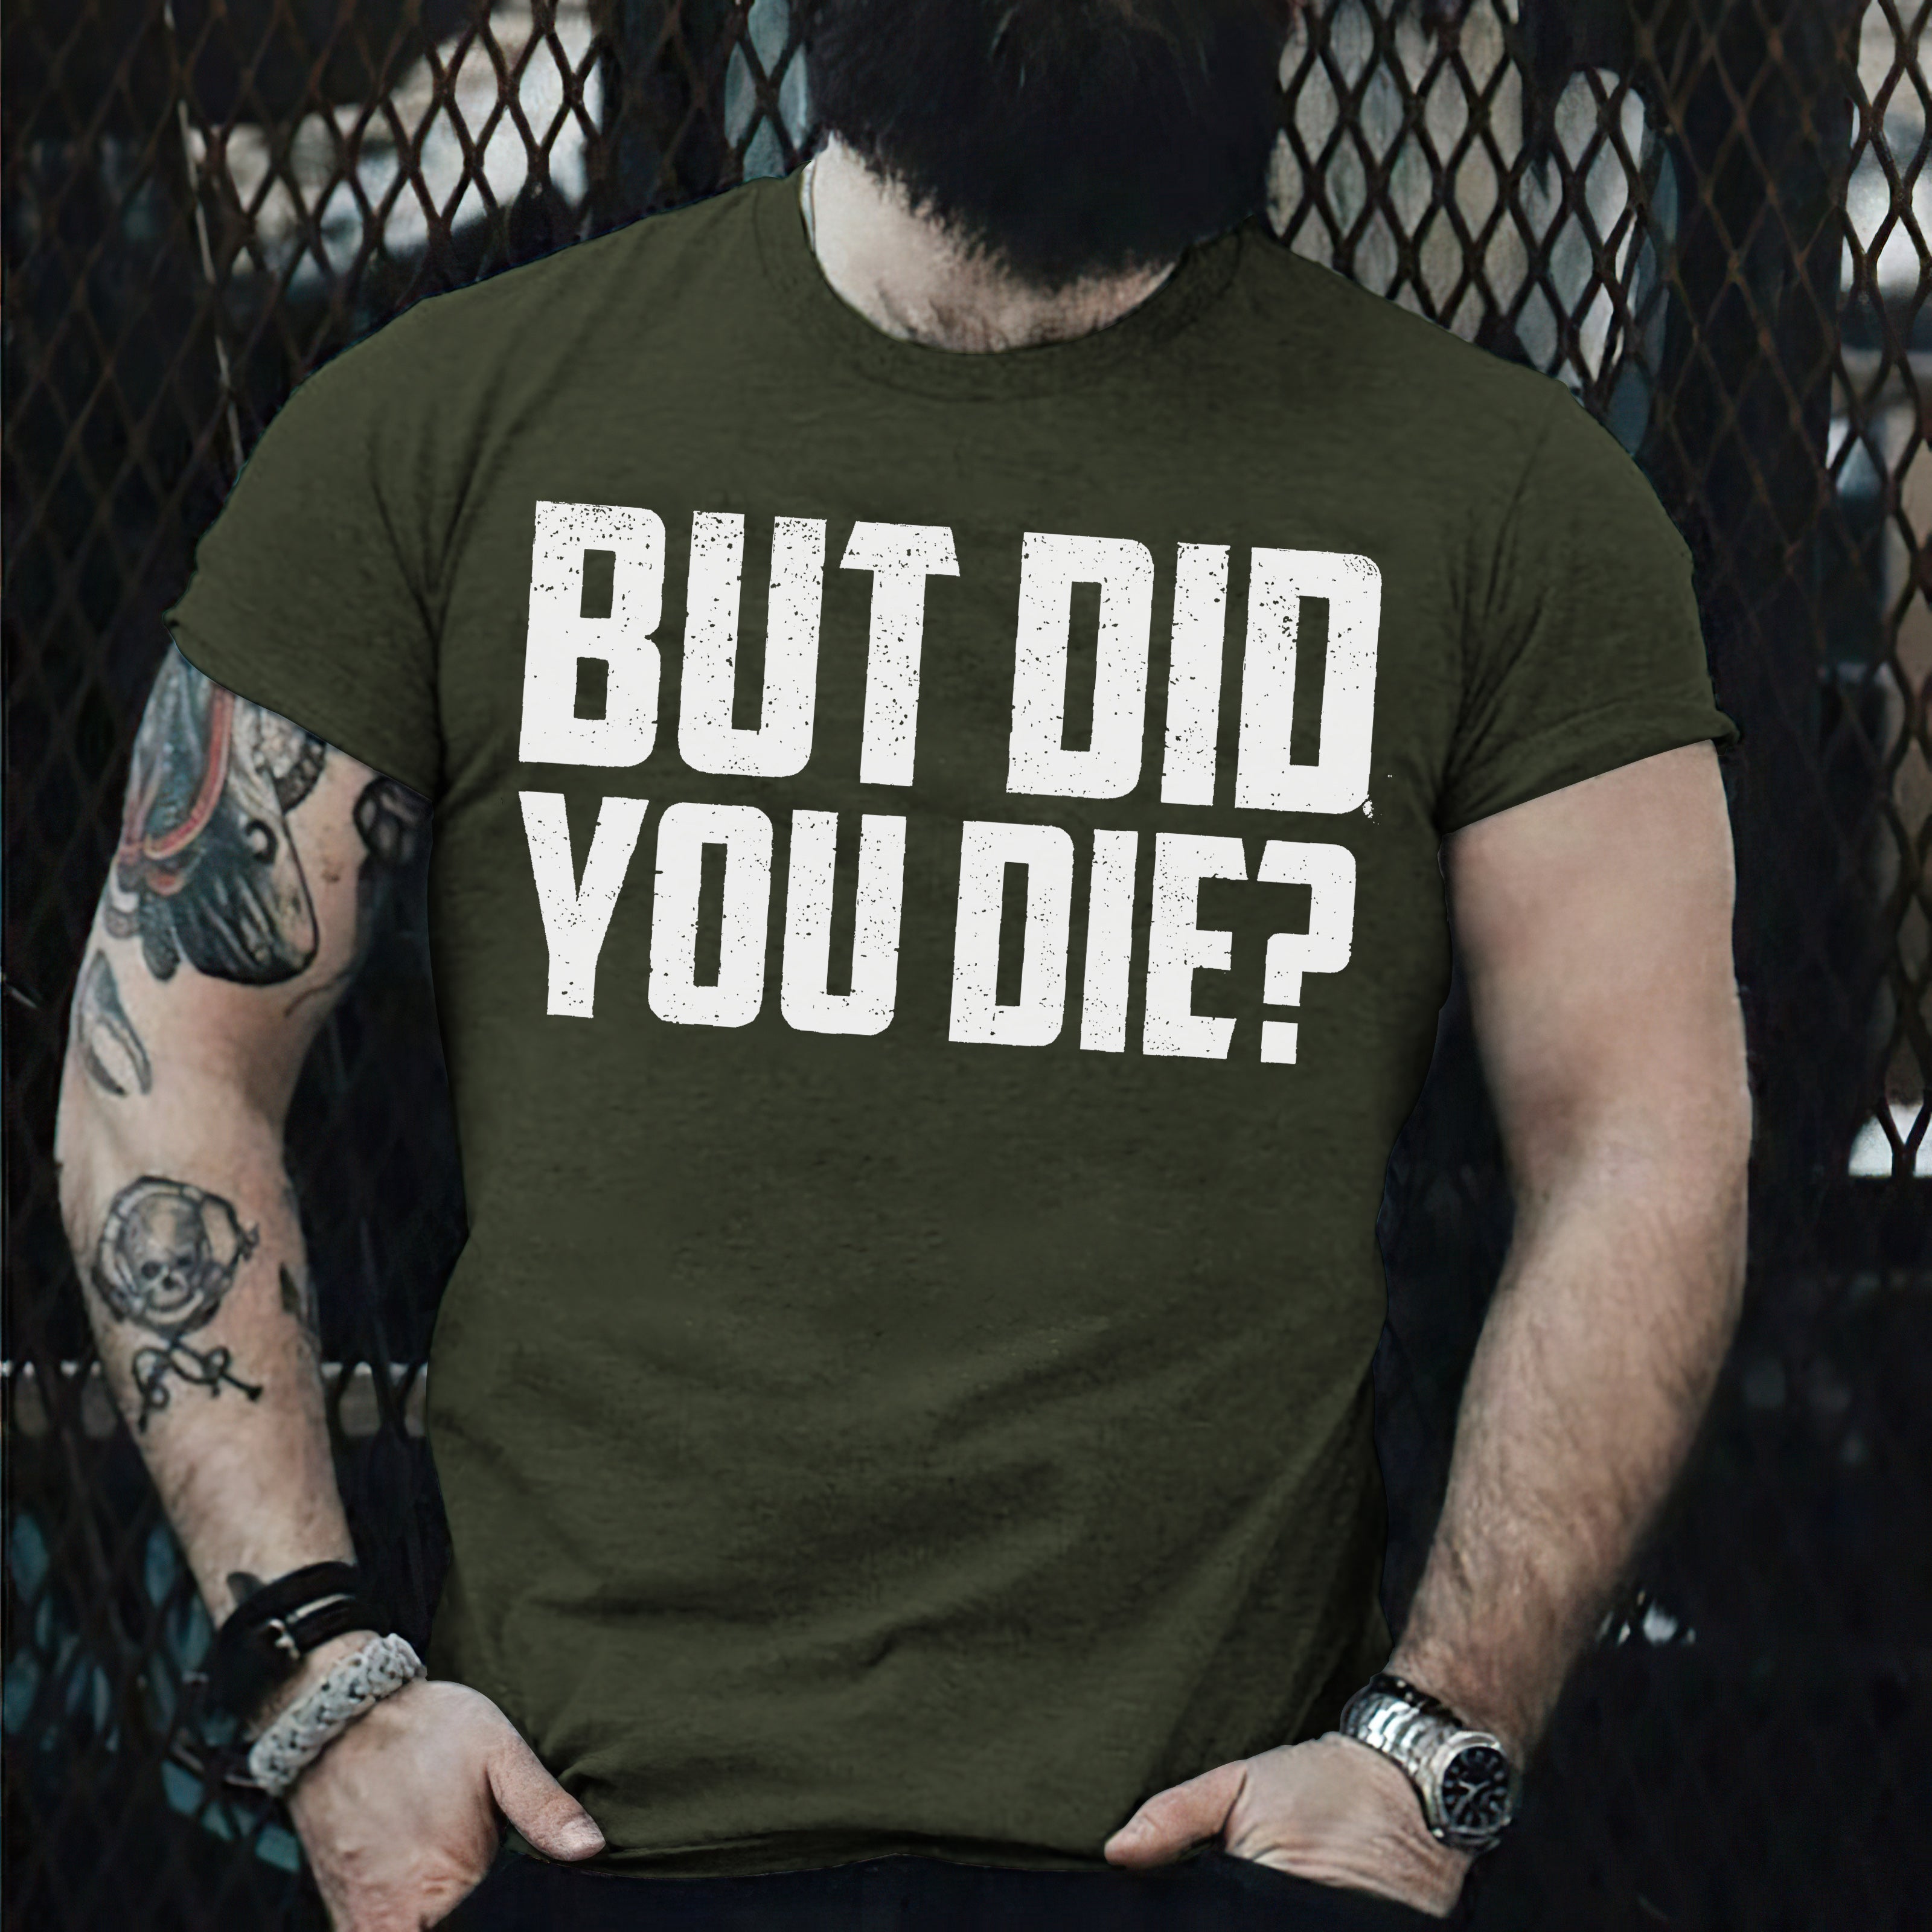 But Did You Die? T-shirt